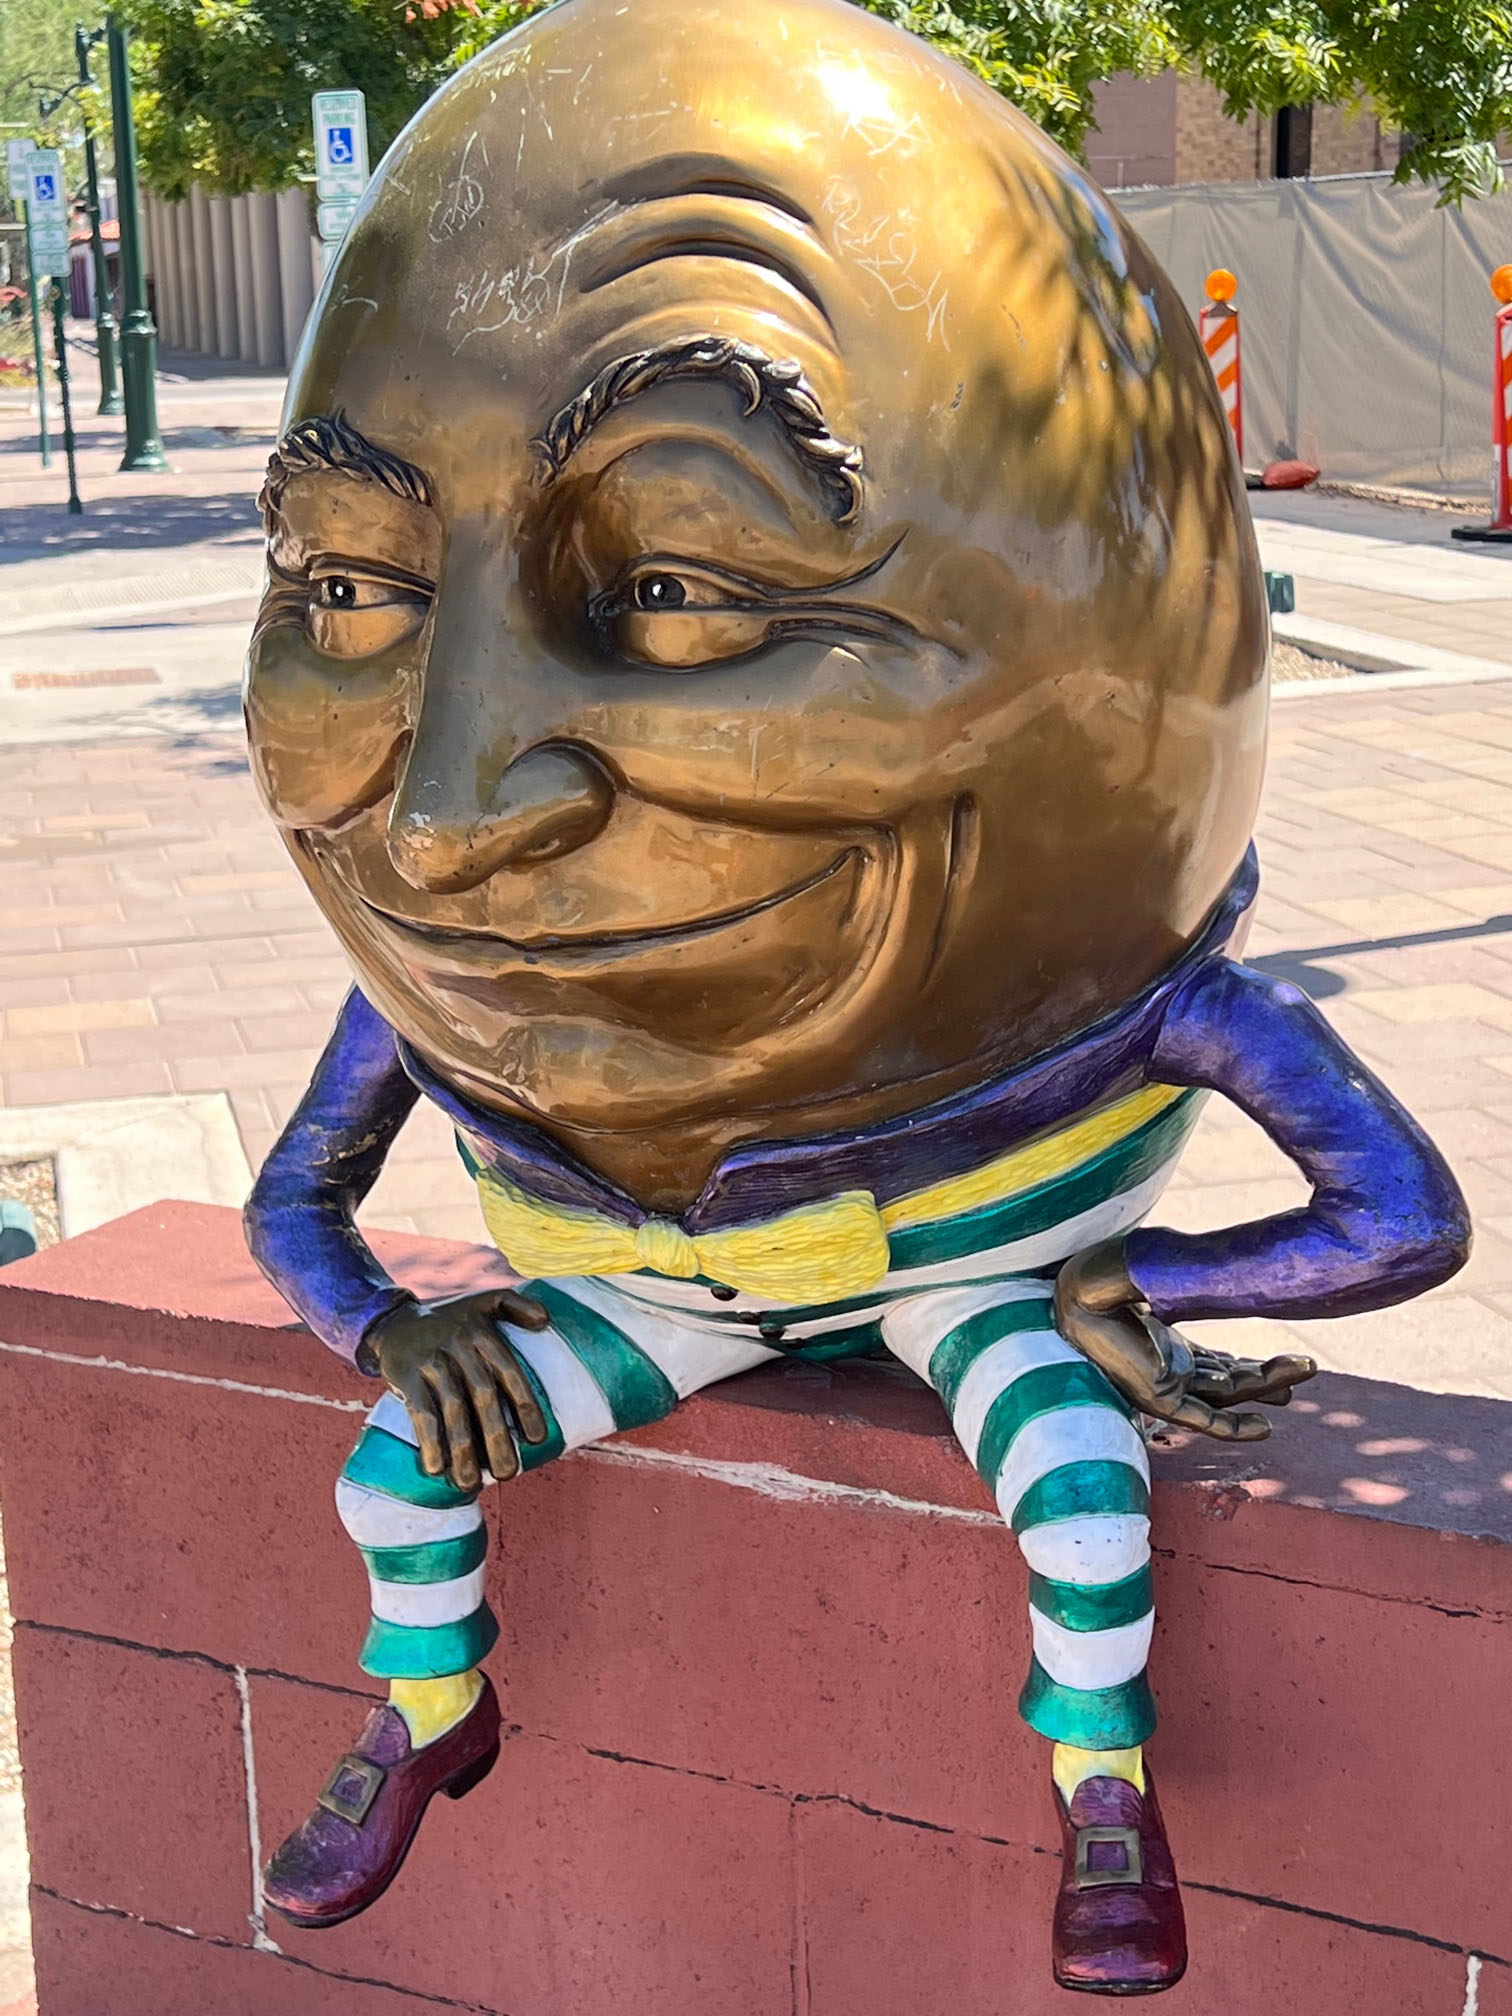 things to do in mesa az - Humpty Dumpty sculpture in downtown Mesa